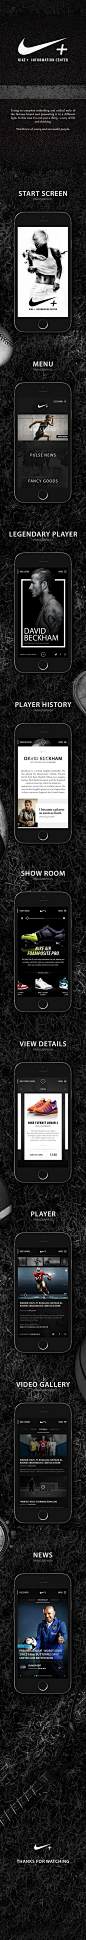 Nike. New Look & Concept: 